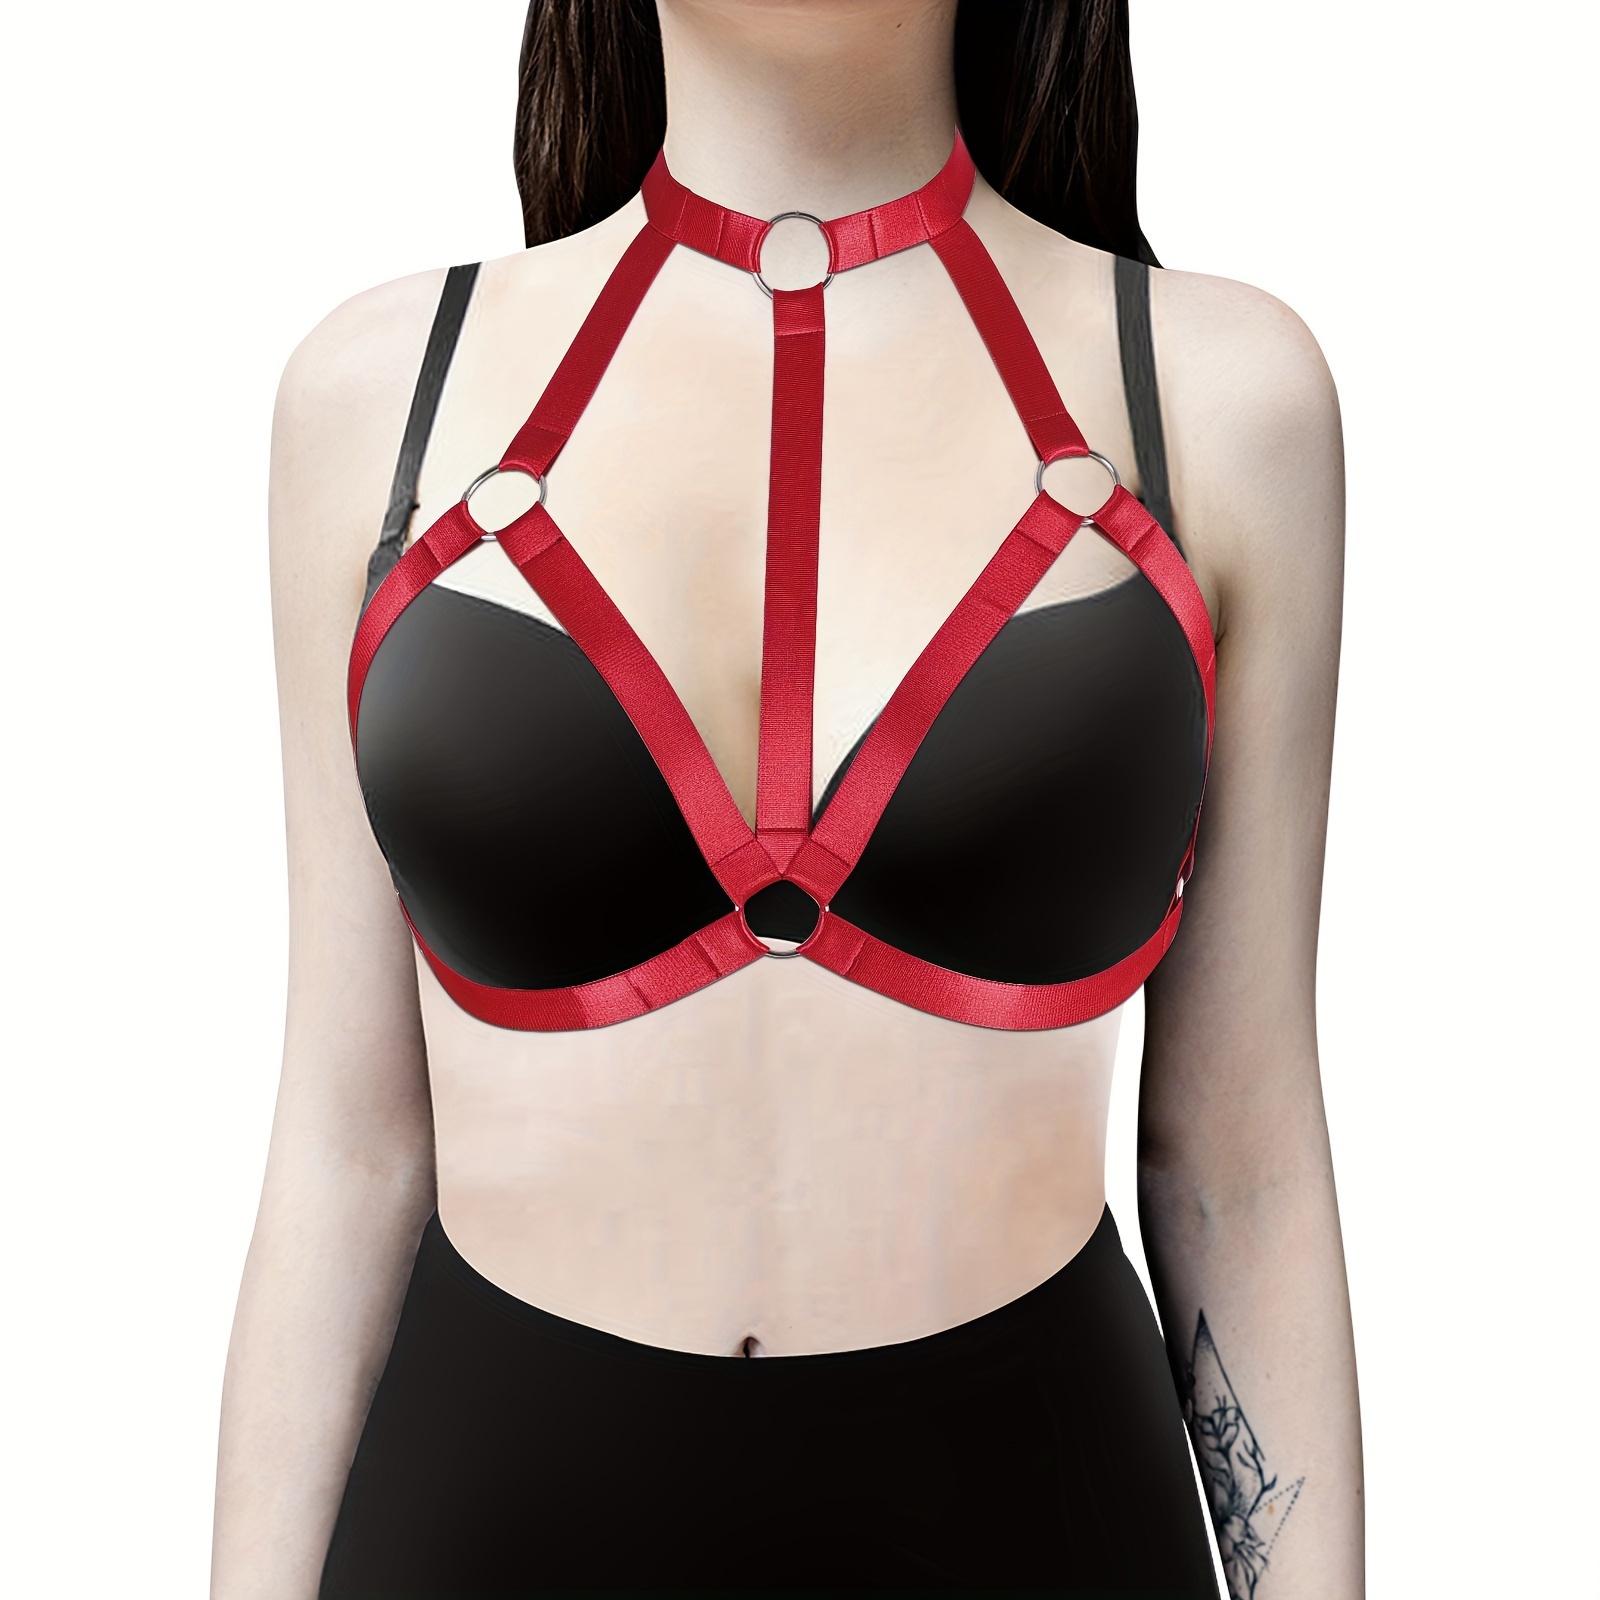 New Sexy Plus Size Lingerie Harness Cage Bra Exotic Halter Neck